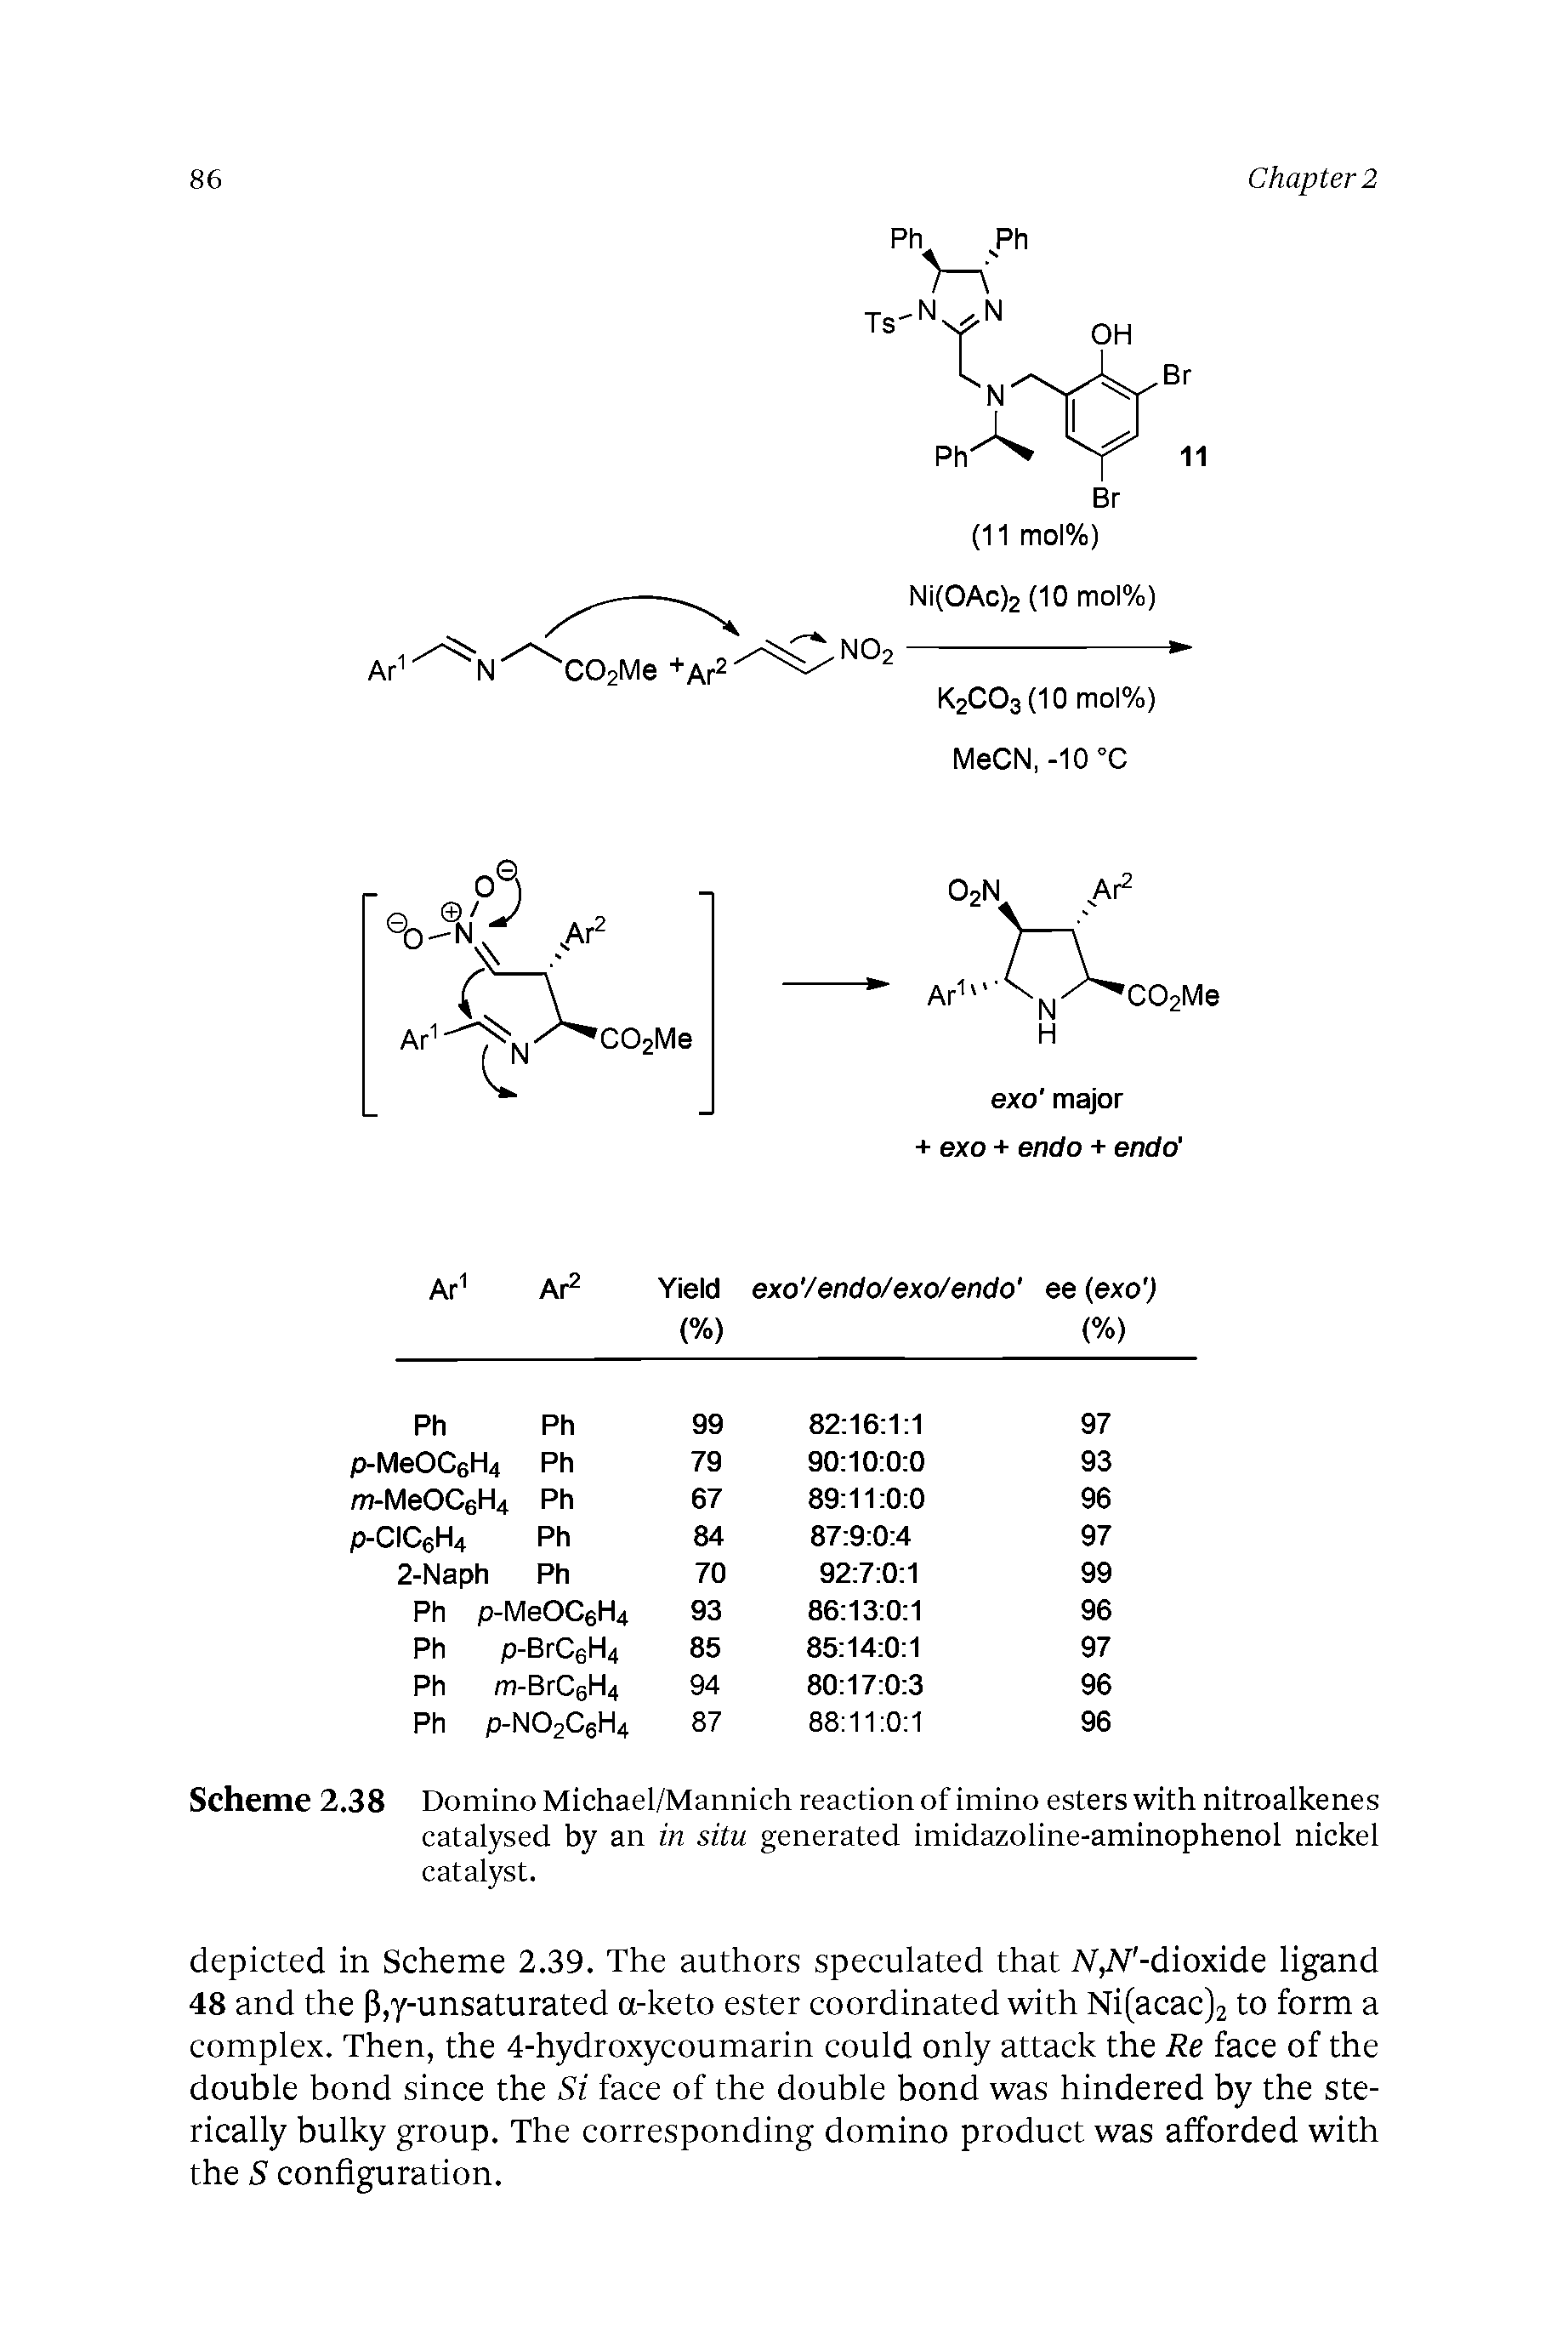 Scheme 2.38 Domino Michael/Mannich reaction of imino esters with nitroalkenes catalysed by an in situ generated imidazoline-aminophenol nickel catalyst.